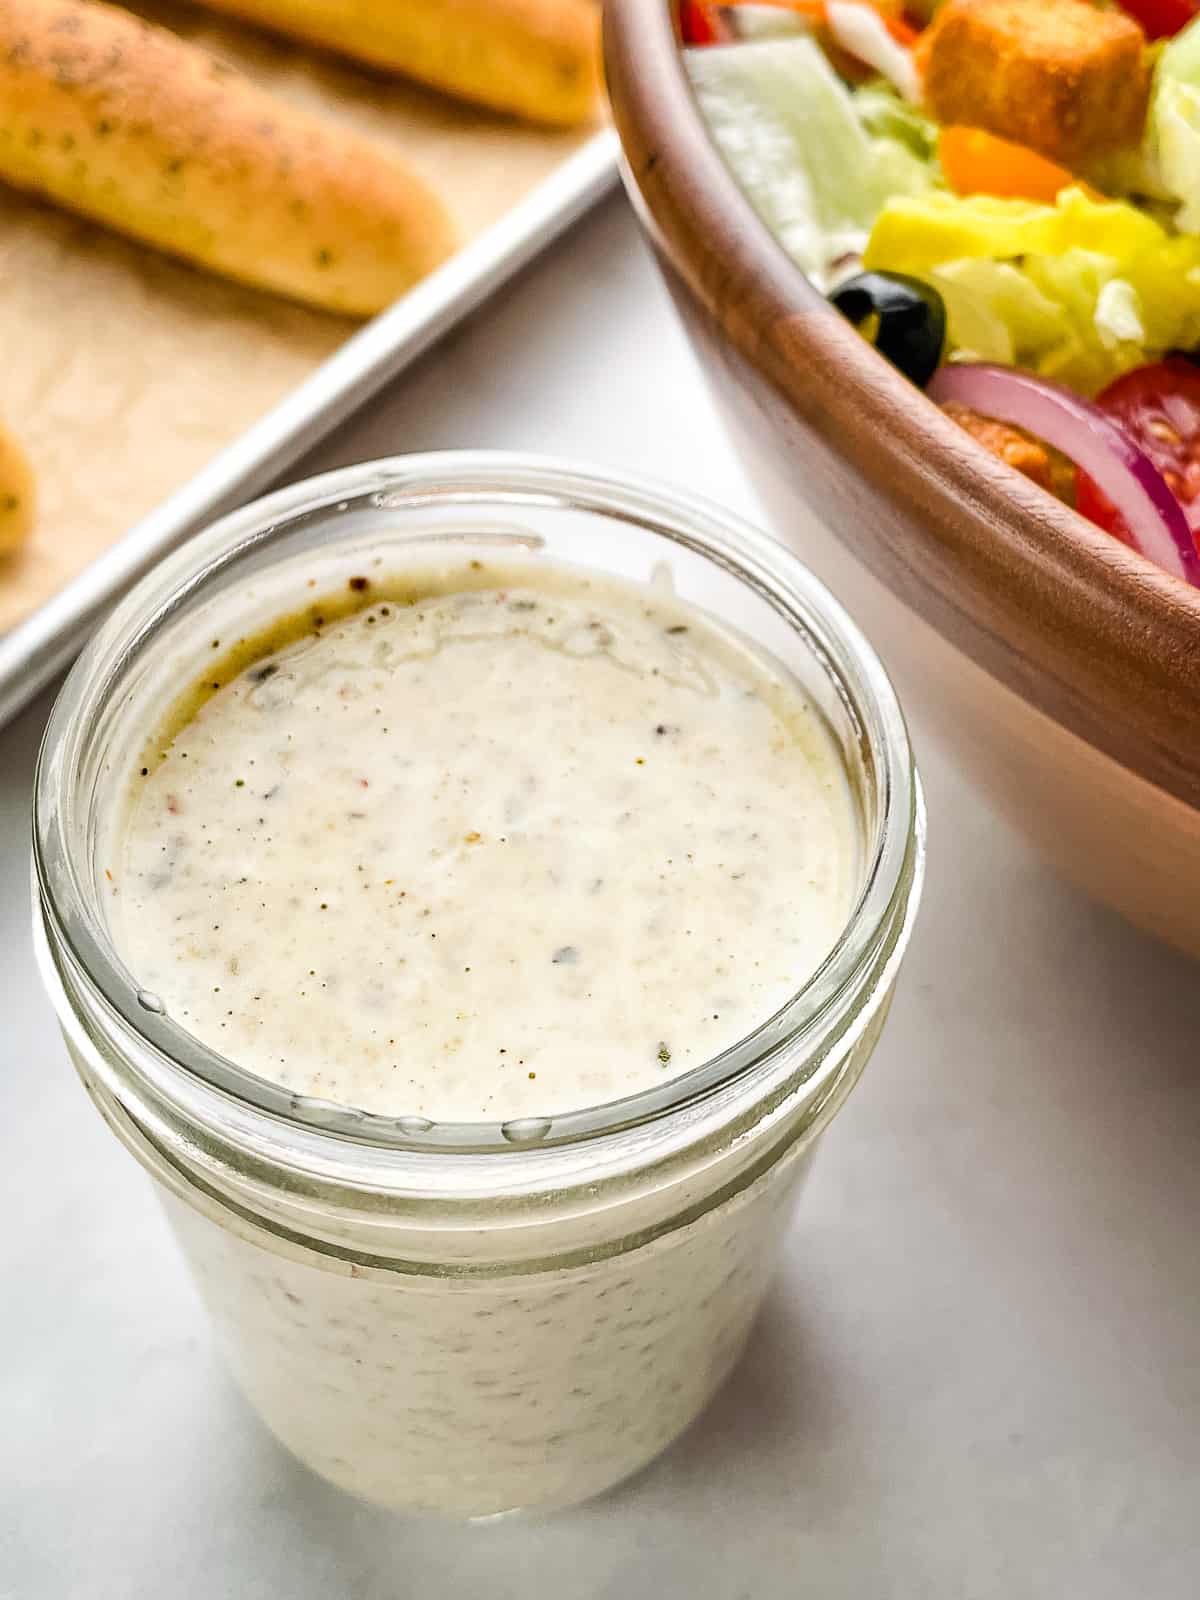 Pint jar filled with creamy Italian dressing. Salad and breadsticks in the background.